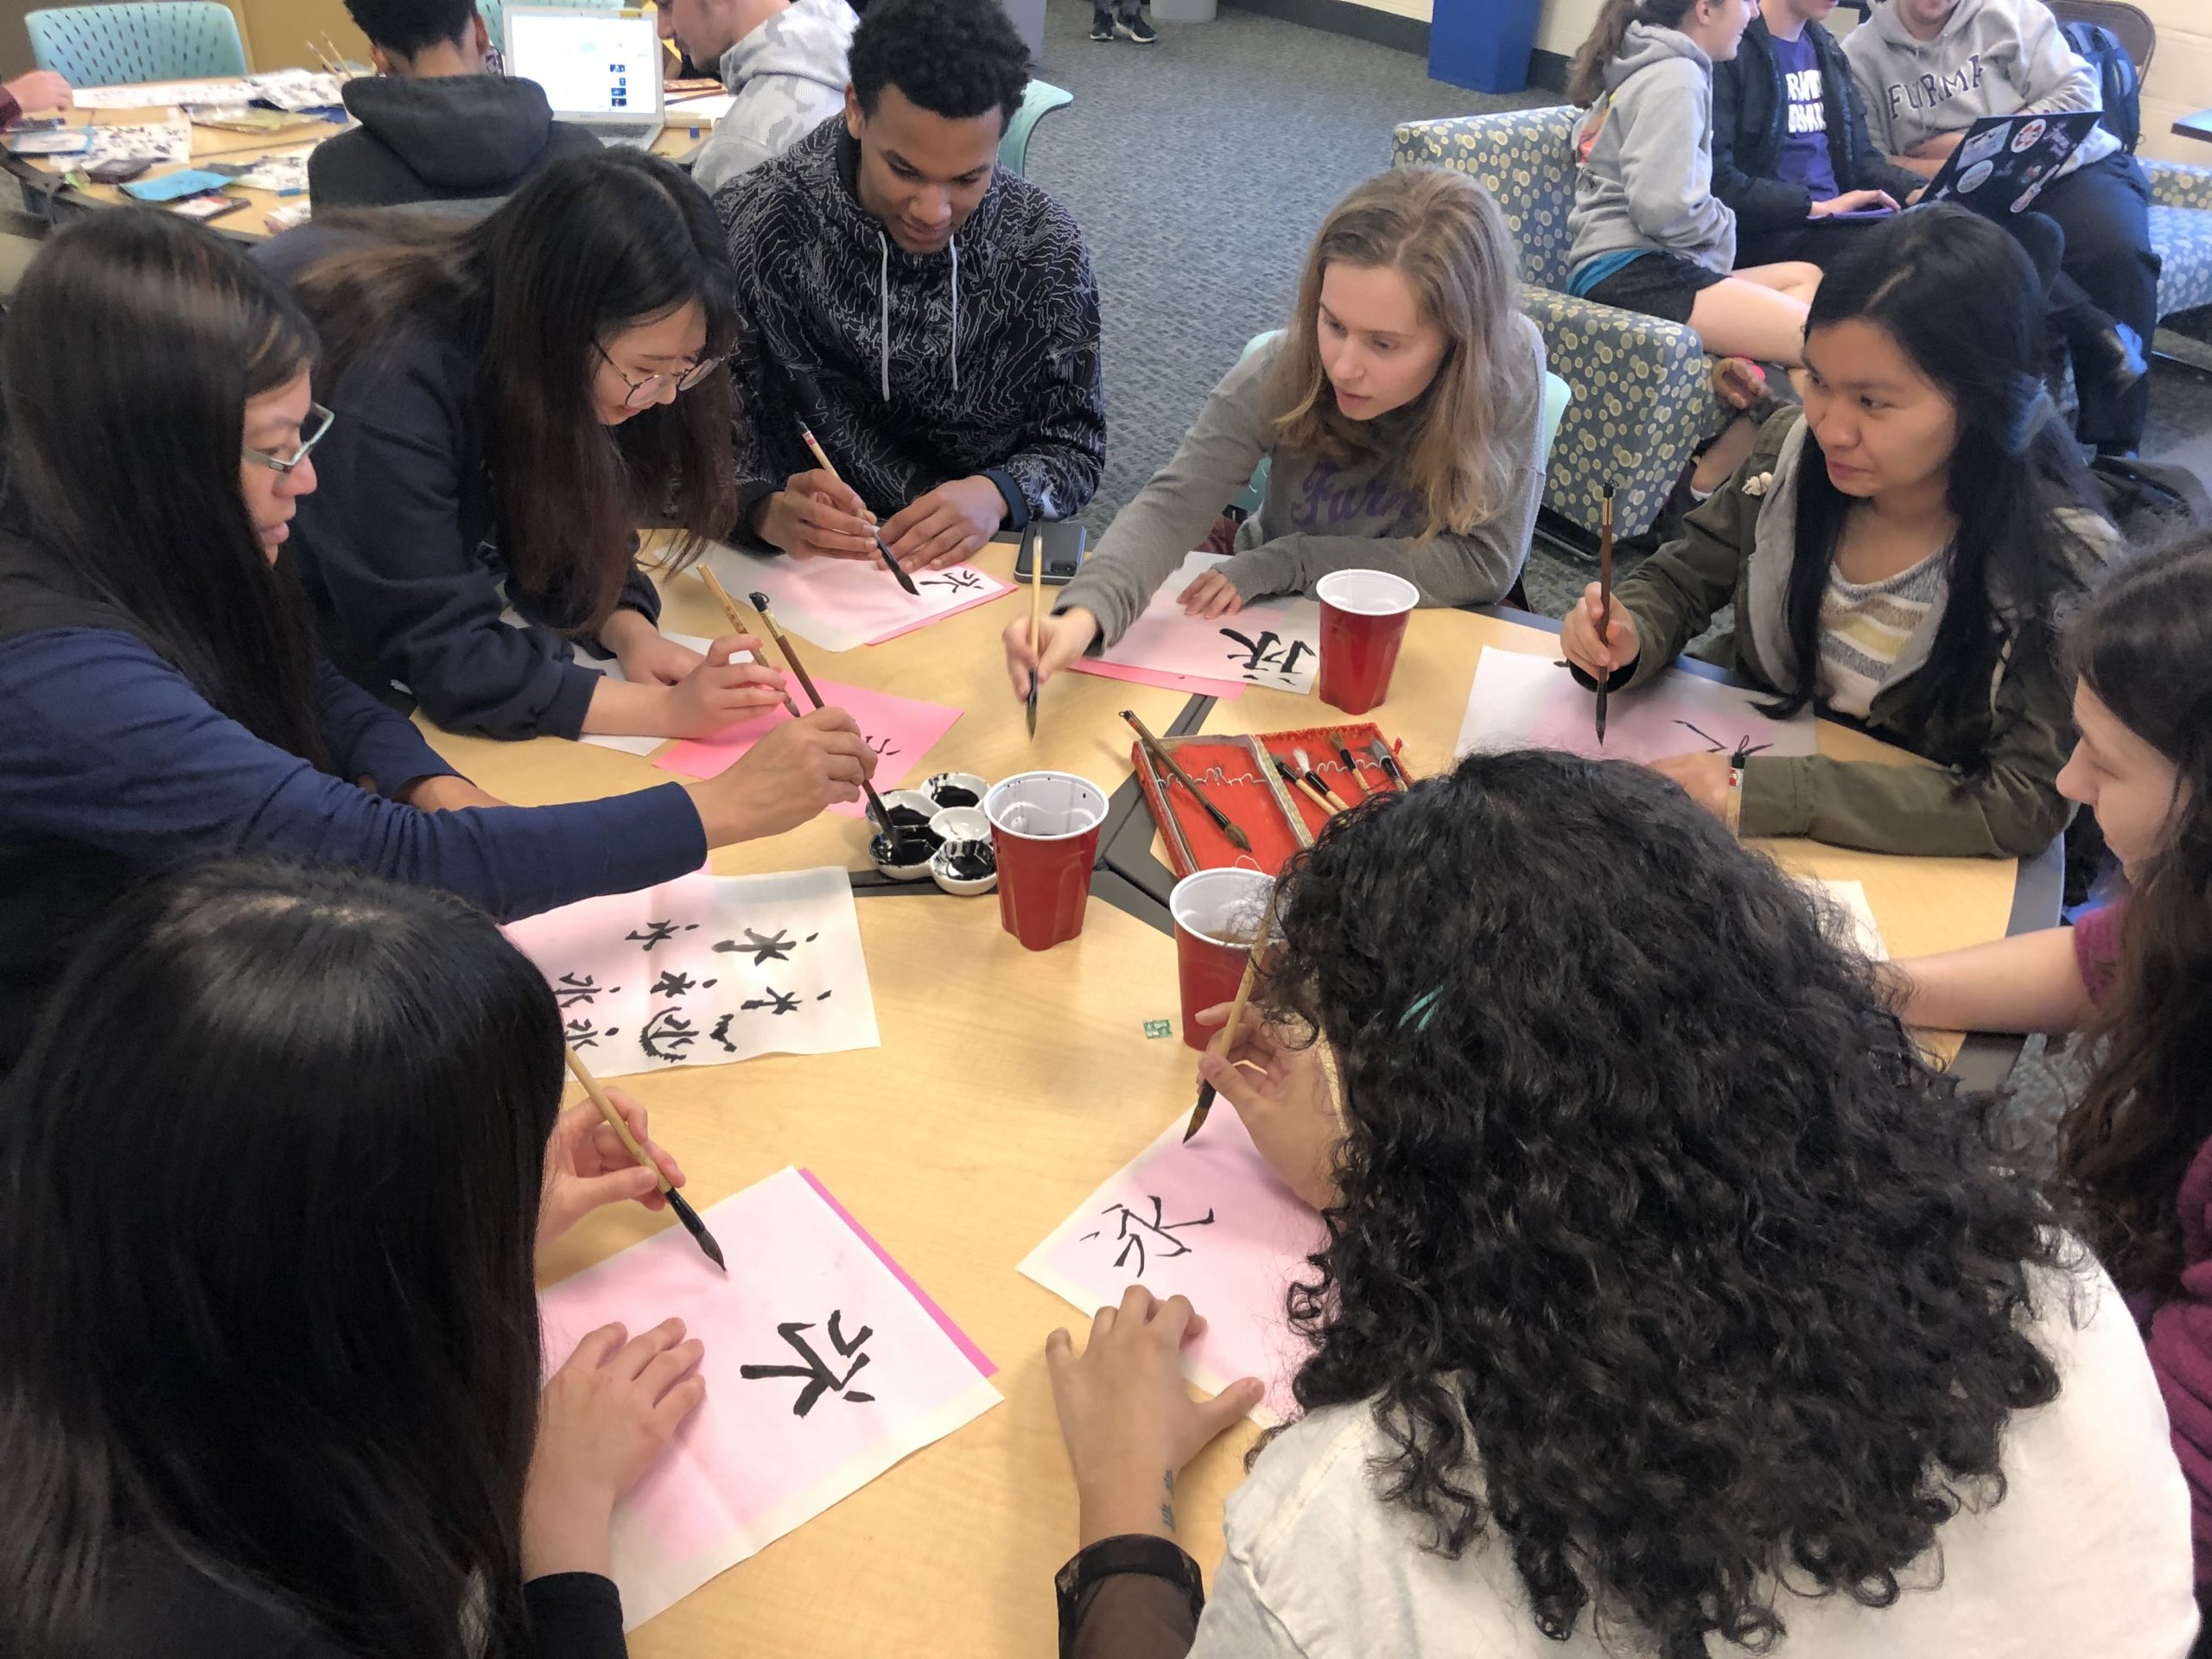 Students working on calligraphy